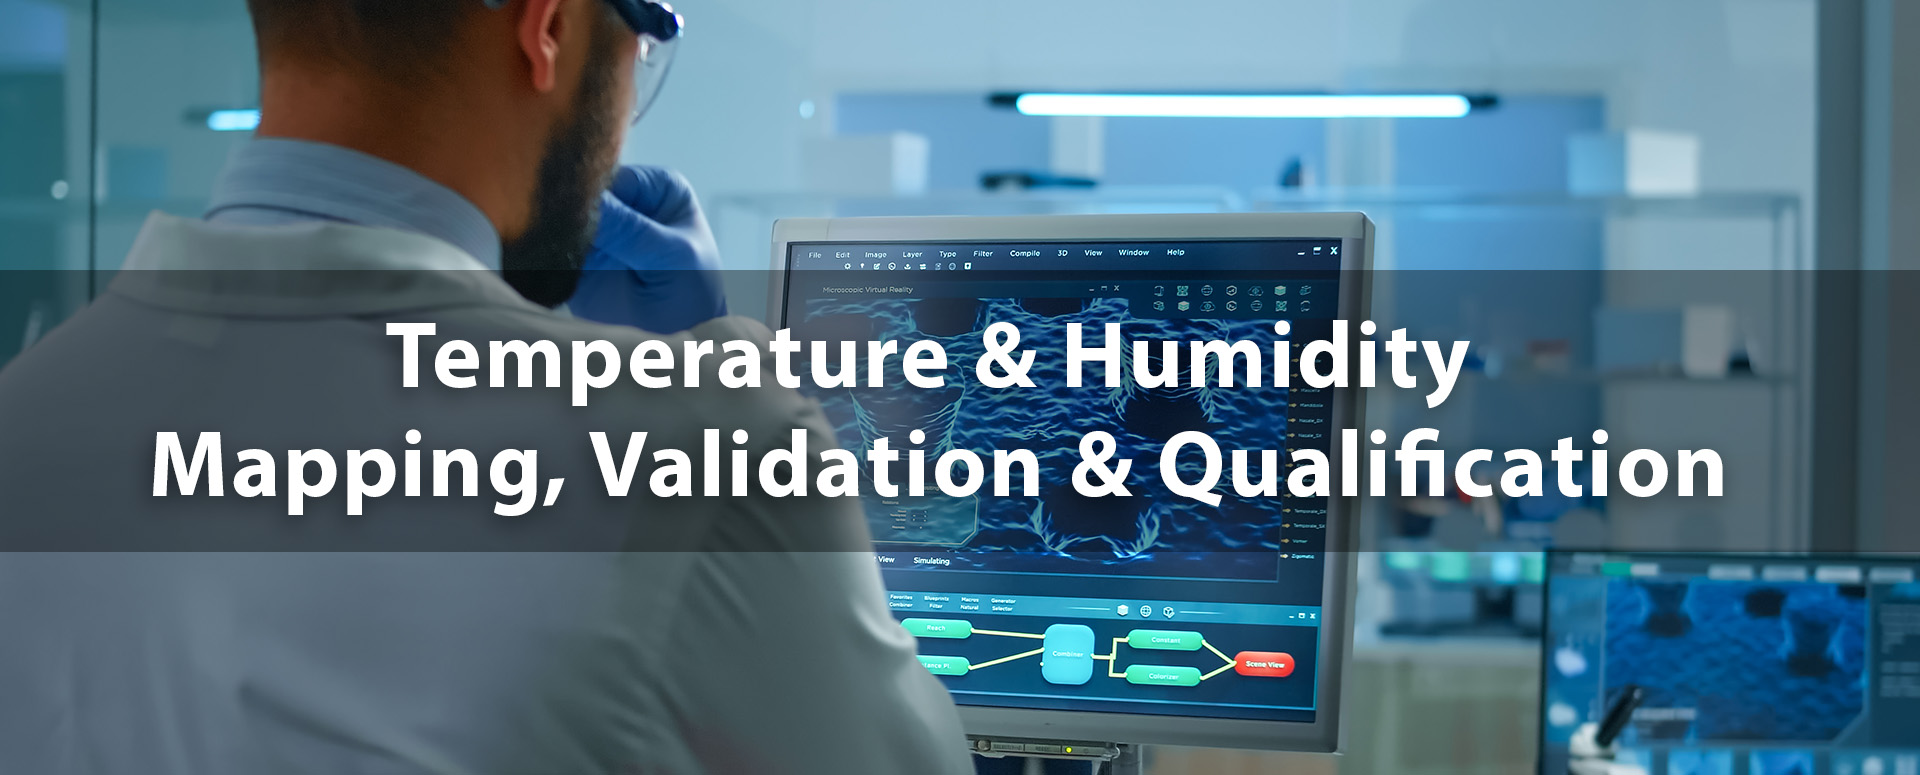 Temperature-Humidity-Mapping-Validation-Qualification